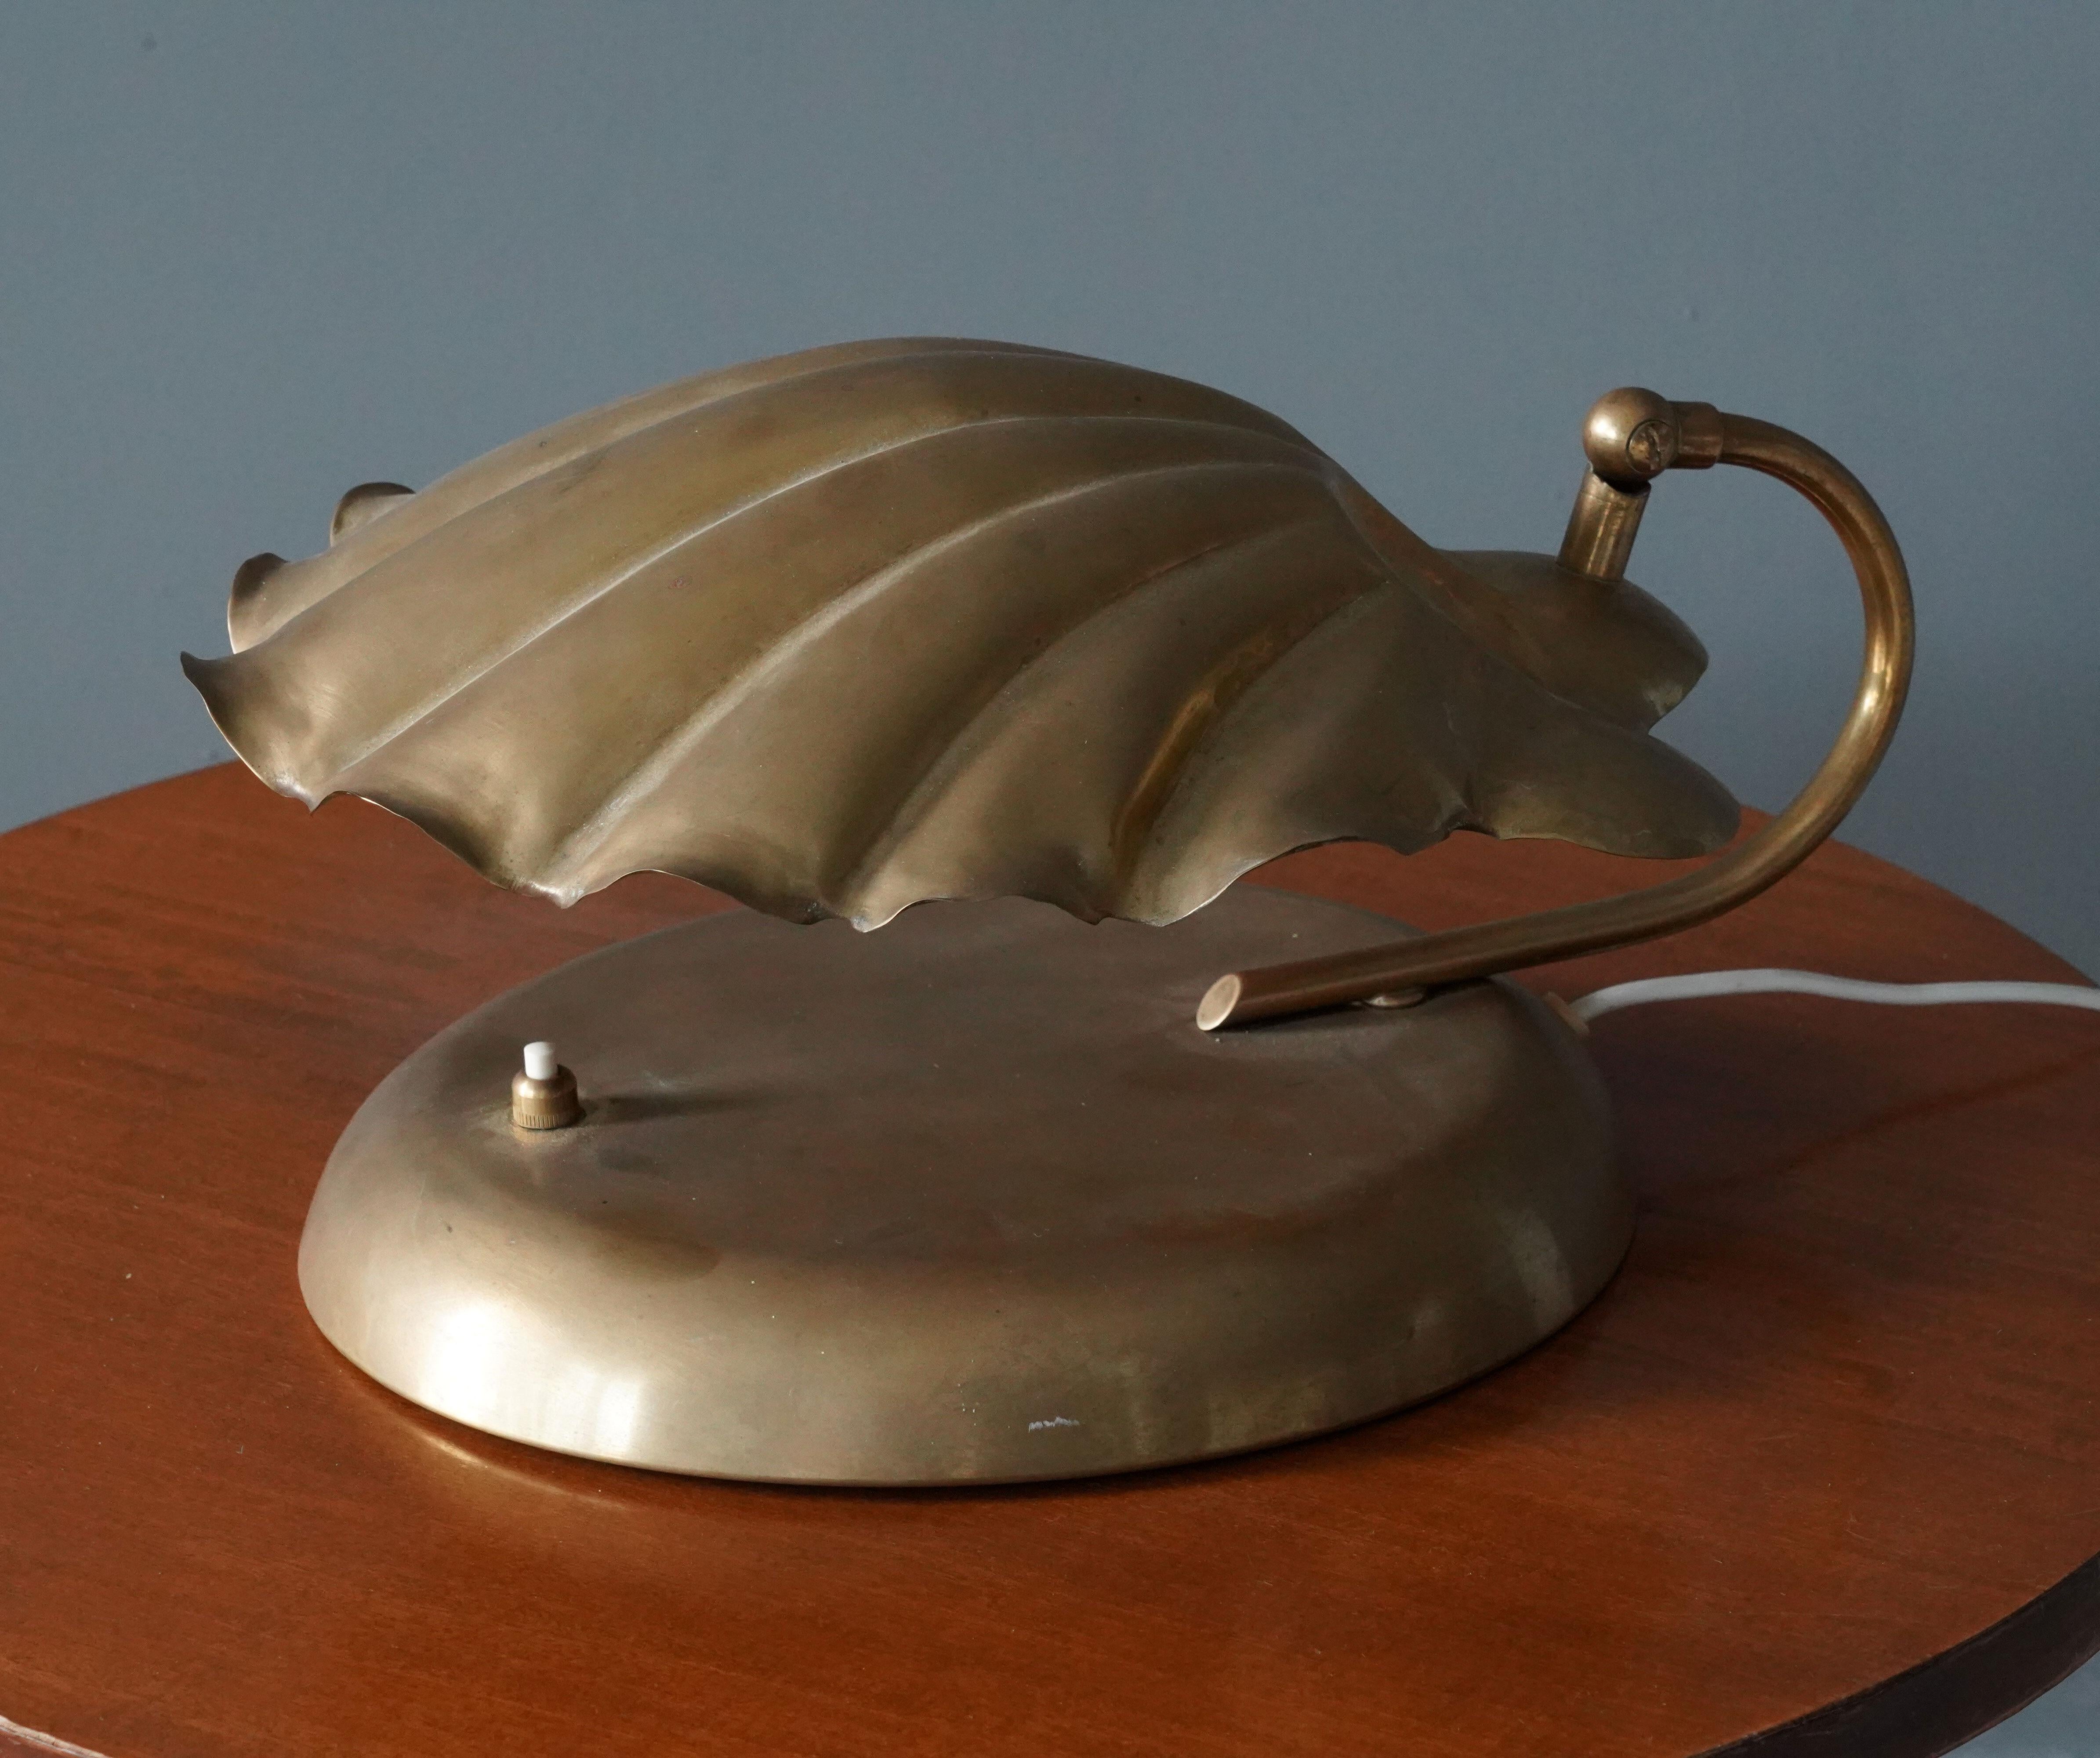 A table lamp designed and produced in Italy, 1960s-1970s. In brass.

Other designers of the period include Max Ingrand, Angelo Lelii, Paul Evans, Gabriella Crespi, and Paavo Tynell.